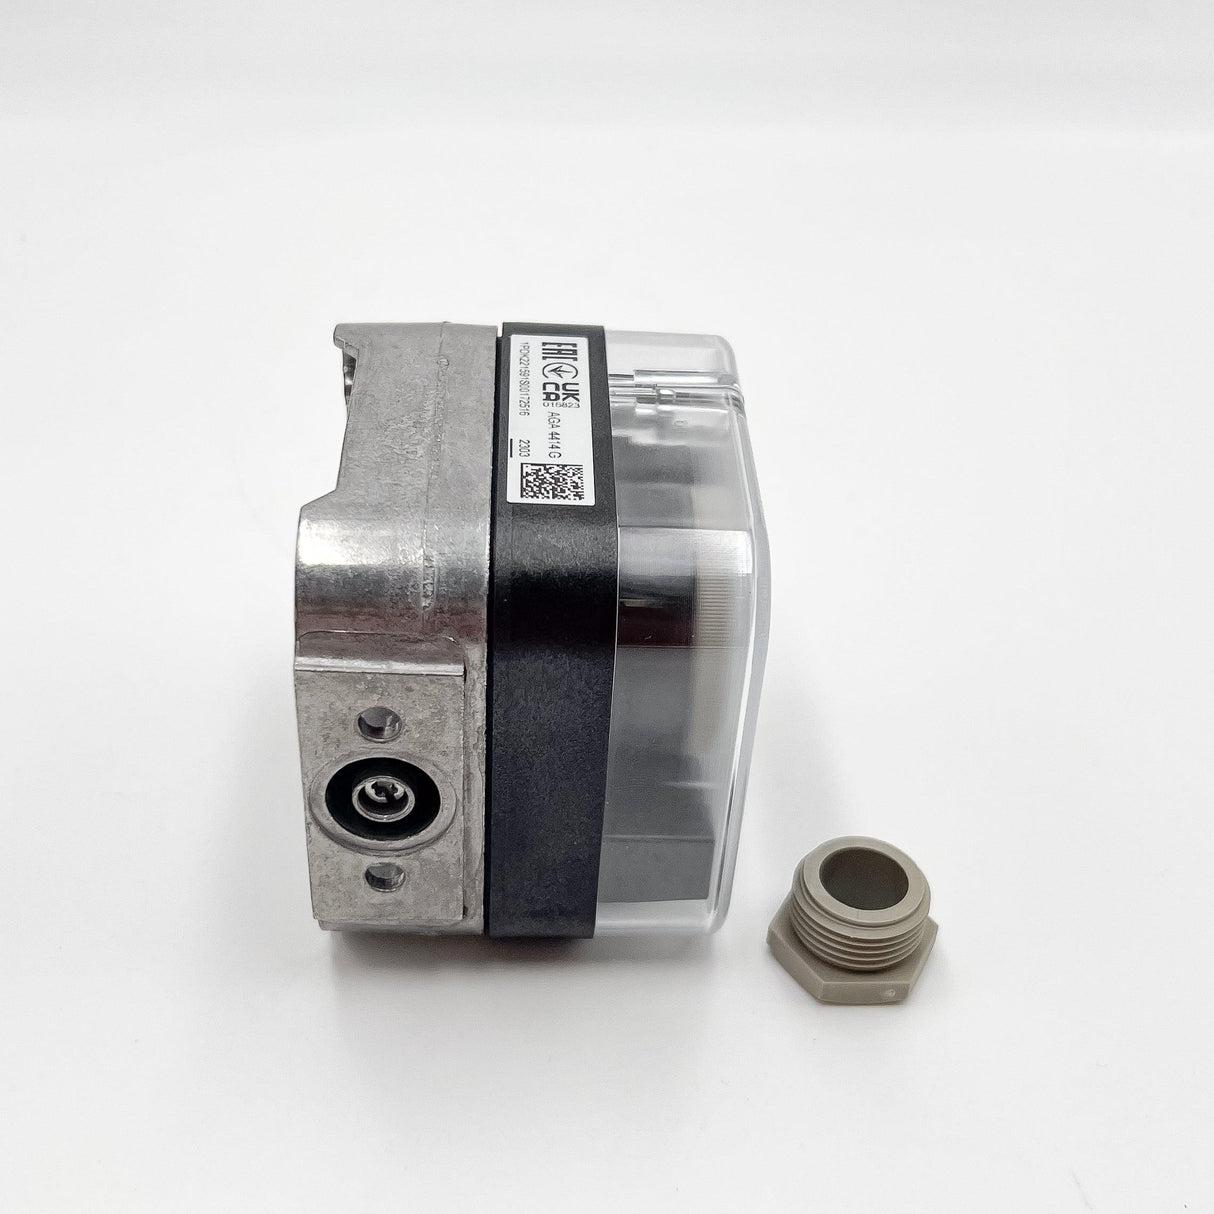 Dungs LGW3 A4 0.4-3 mbar Differential Air Pressure Switch